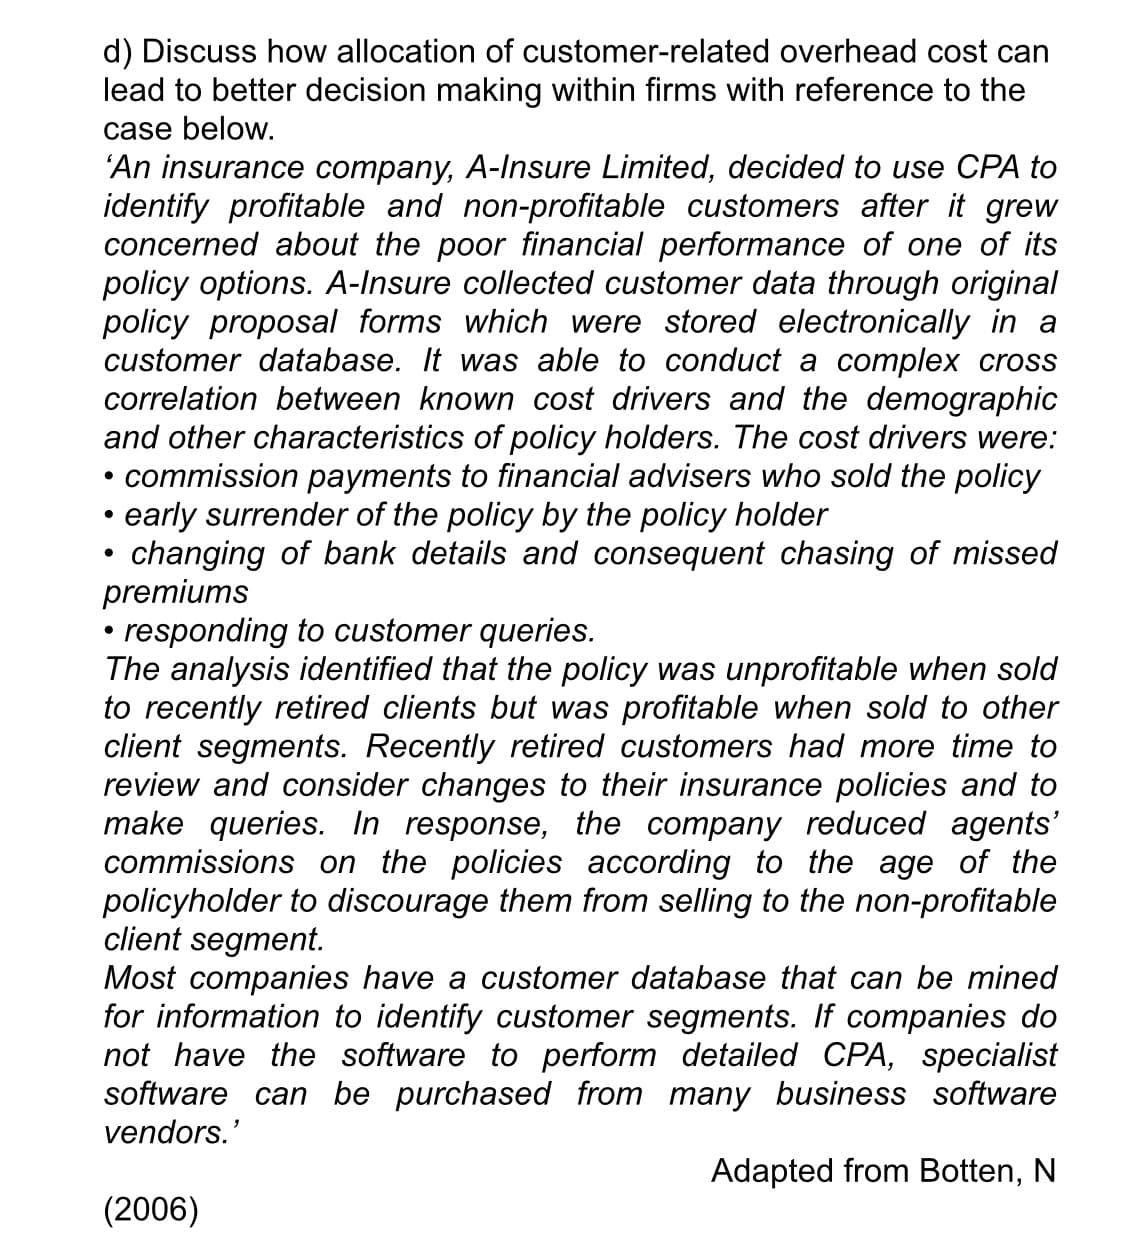 d) Discuss how allocation of customer-related overhead cost can
lead to better decision making within firms with reference to the
case below.
'An insurance company, A-Insure Limited, decided to use CPA to
identify profitable and non-profitable customers after it grew
concerned about the poor financial performance of one of its
policy options. A-Insure collected customer data through original
policy proposal forms which were stored electronically in a
customer database. It was able to conduct a complex cross
correlation between known cost drivers and the demographic
and other characteristics of policy holders. The cost drivers were:
• commission payments to financial advisers who sold the policy
early surrender of the policy by the policy holder
changing of bank details and consequent chasing of missed
premiums
responding to customer queries.
The analysis identified that the policy was unprofitable when sold
to recently retired clients but was profitable when sold to other
client segments. Recently retired customers had more time to
review and consider changes to their insurance policies and to
make queries. In response, the company reduced agents'
commissions on the policies according to the age of the
policyholder to discourage them from selling to the non-profitable
client segment.
Most companies have a customer database that can be mined
for information to identify customer segments. If companies do
not have the software to perform detailed CPA, specialist
software can be purchased from many business software
vendors.'
